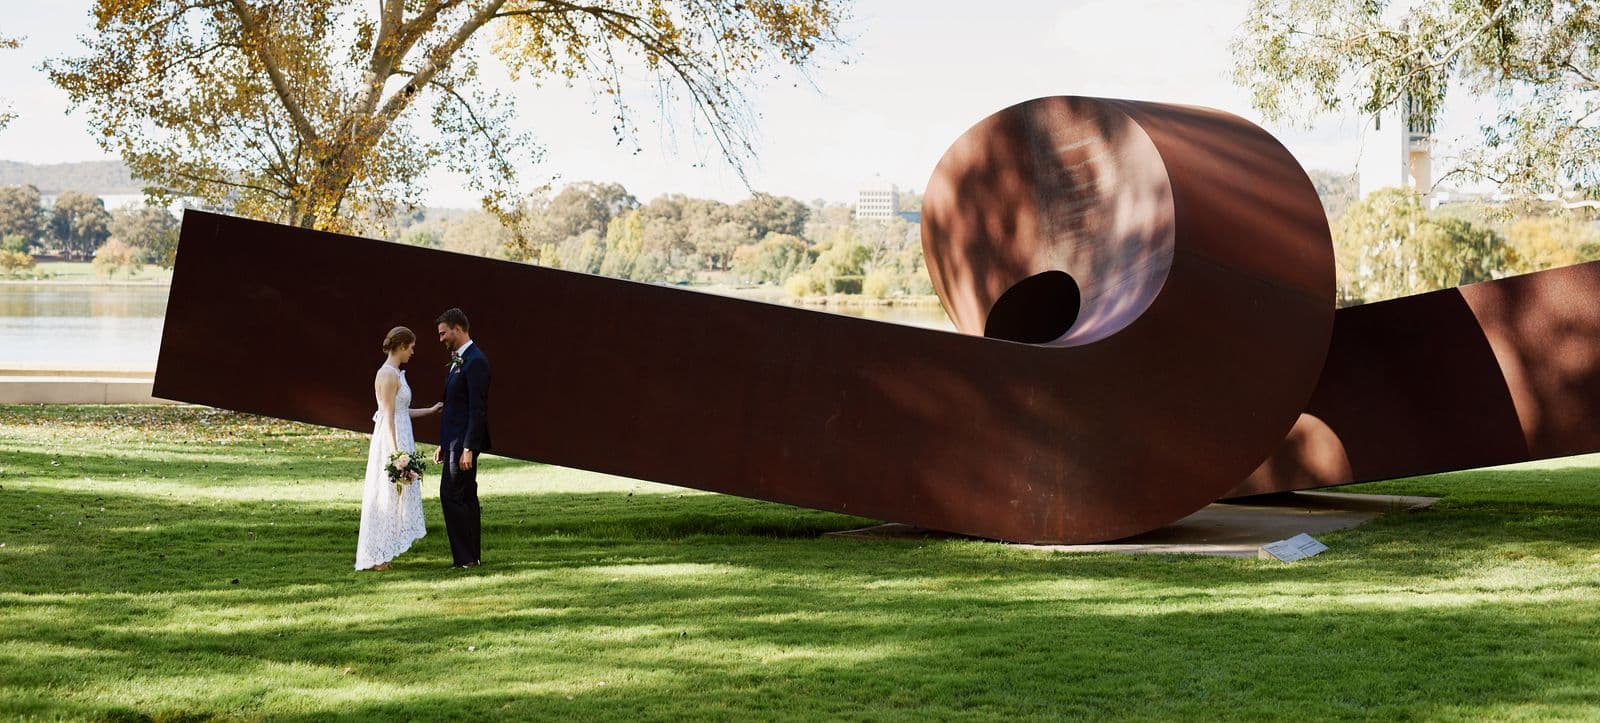 A couple stand, facing each other and holding hands, in front of a large sculpture in a garden